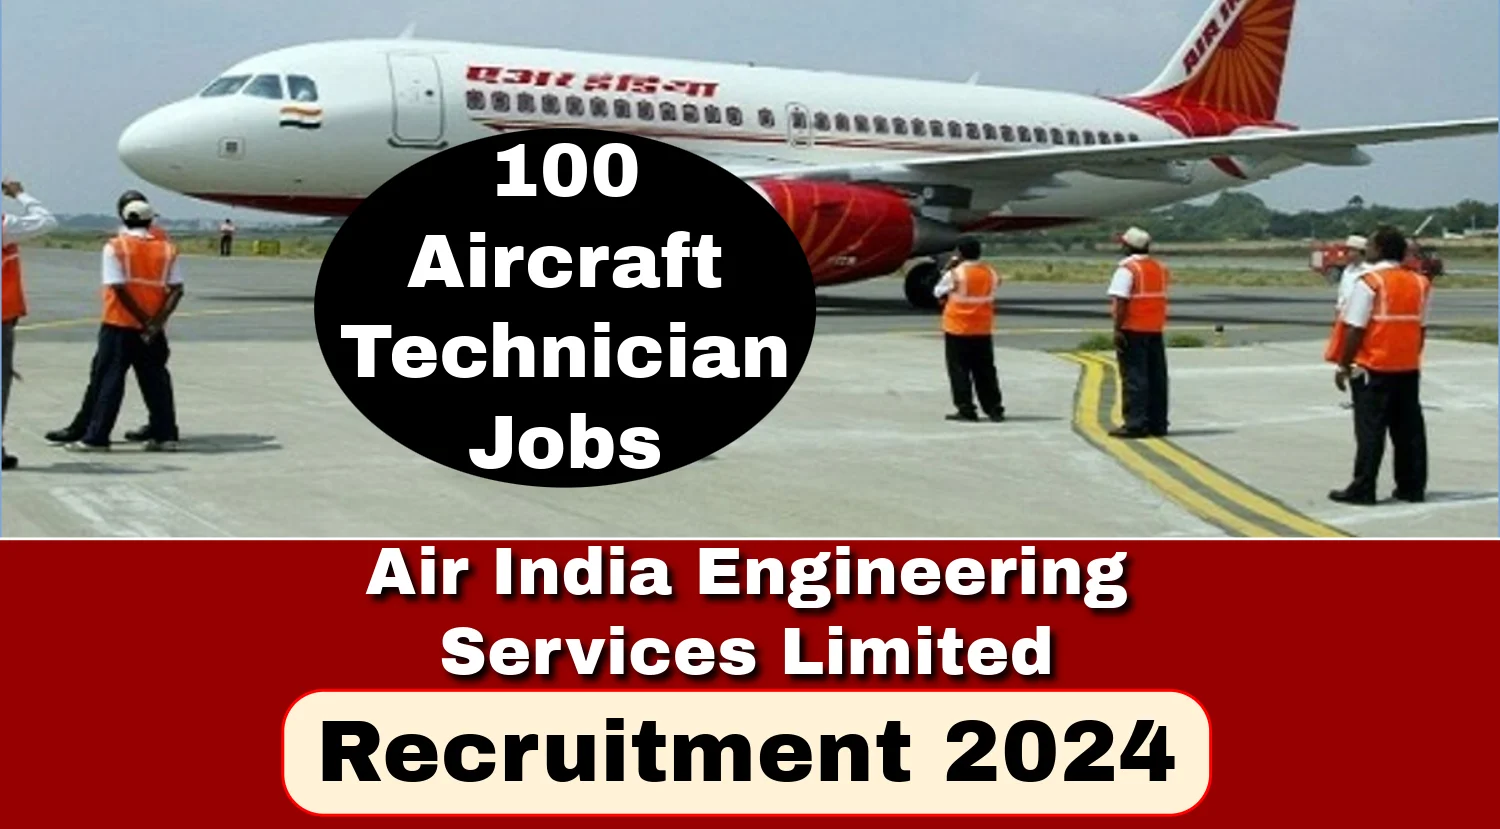 AI Engineering Services Limited is Hiring B1 & B2 Aircraft Technicians and Trainee Aircraft Tech,100+ Vacancy - Apply Now